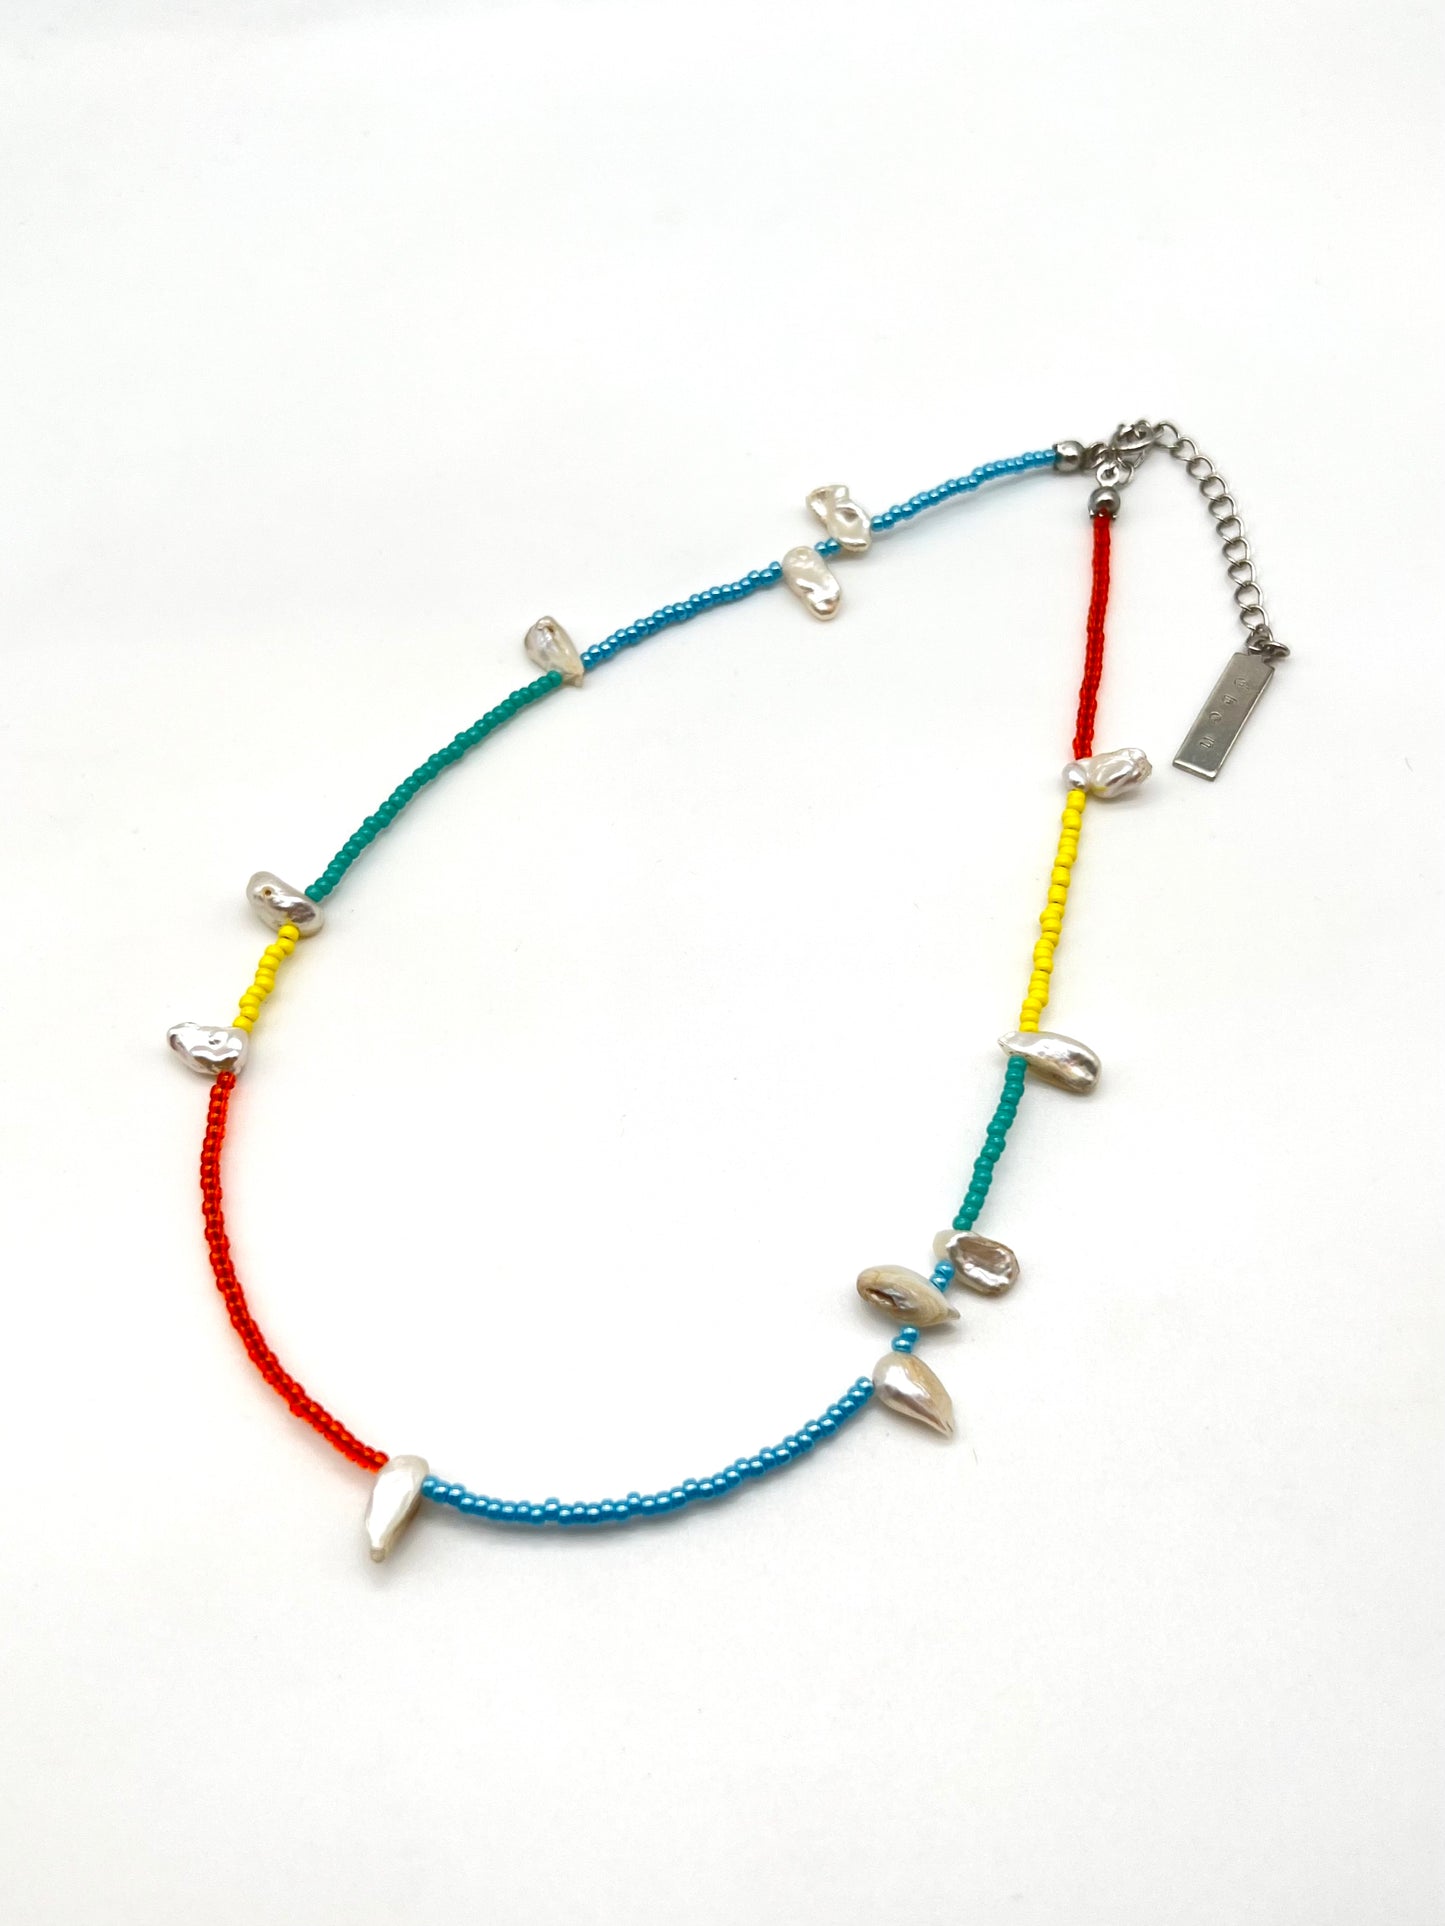 77beads necklace - colorful